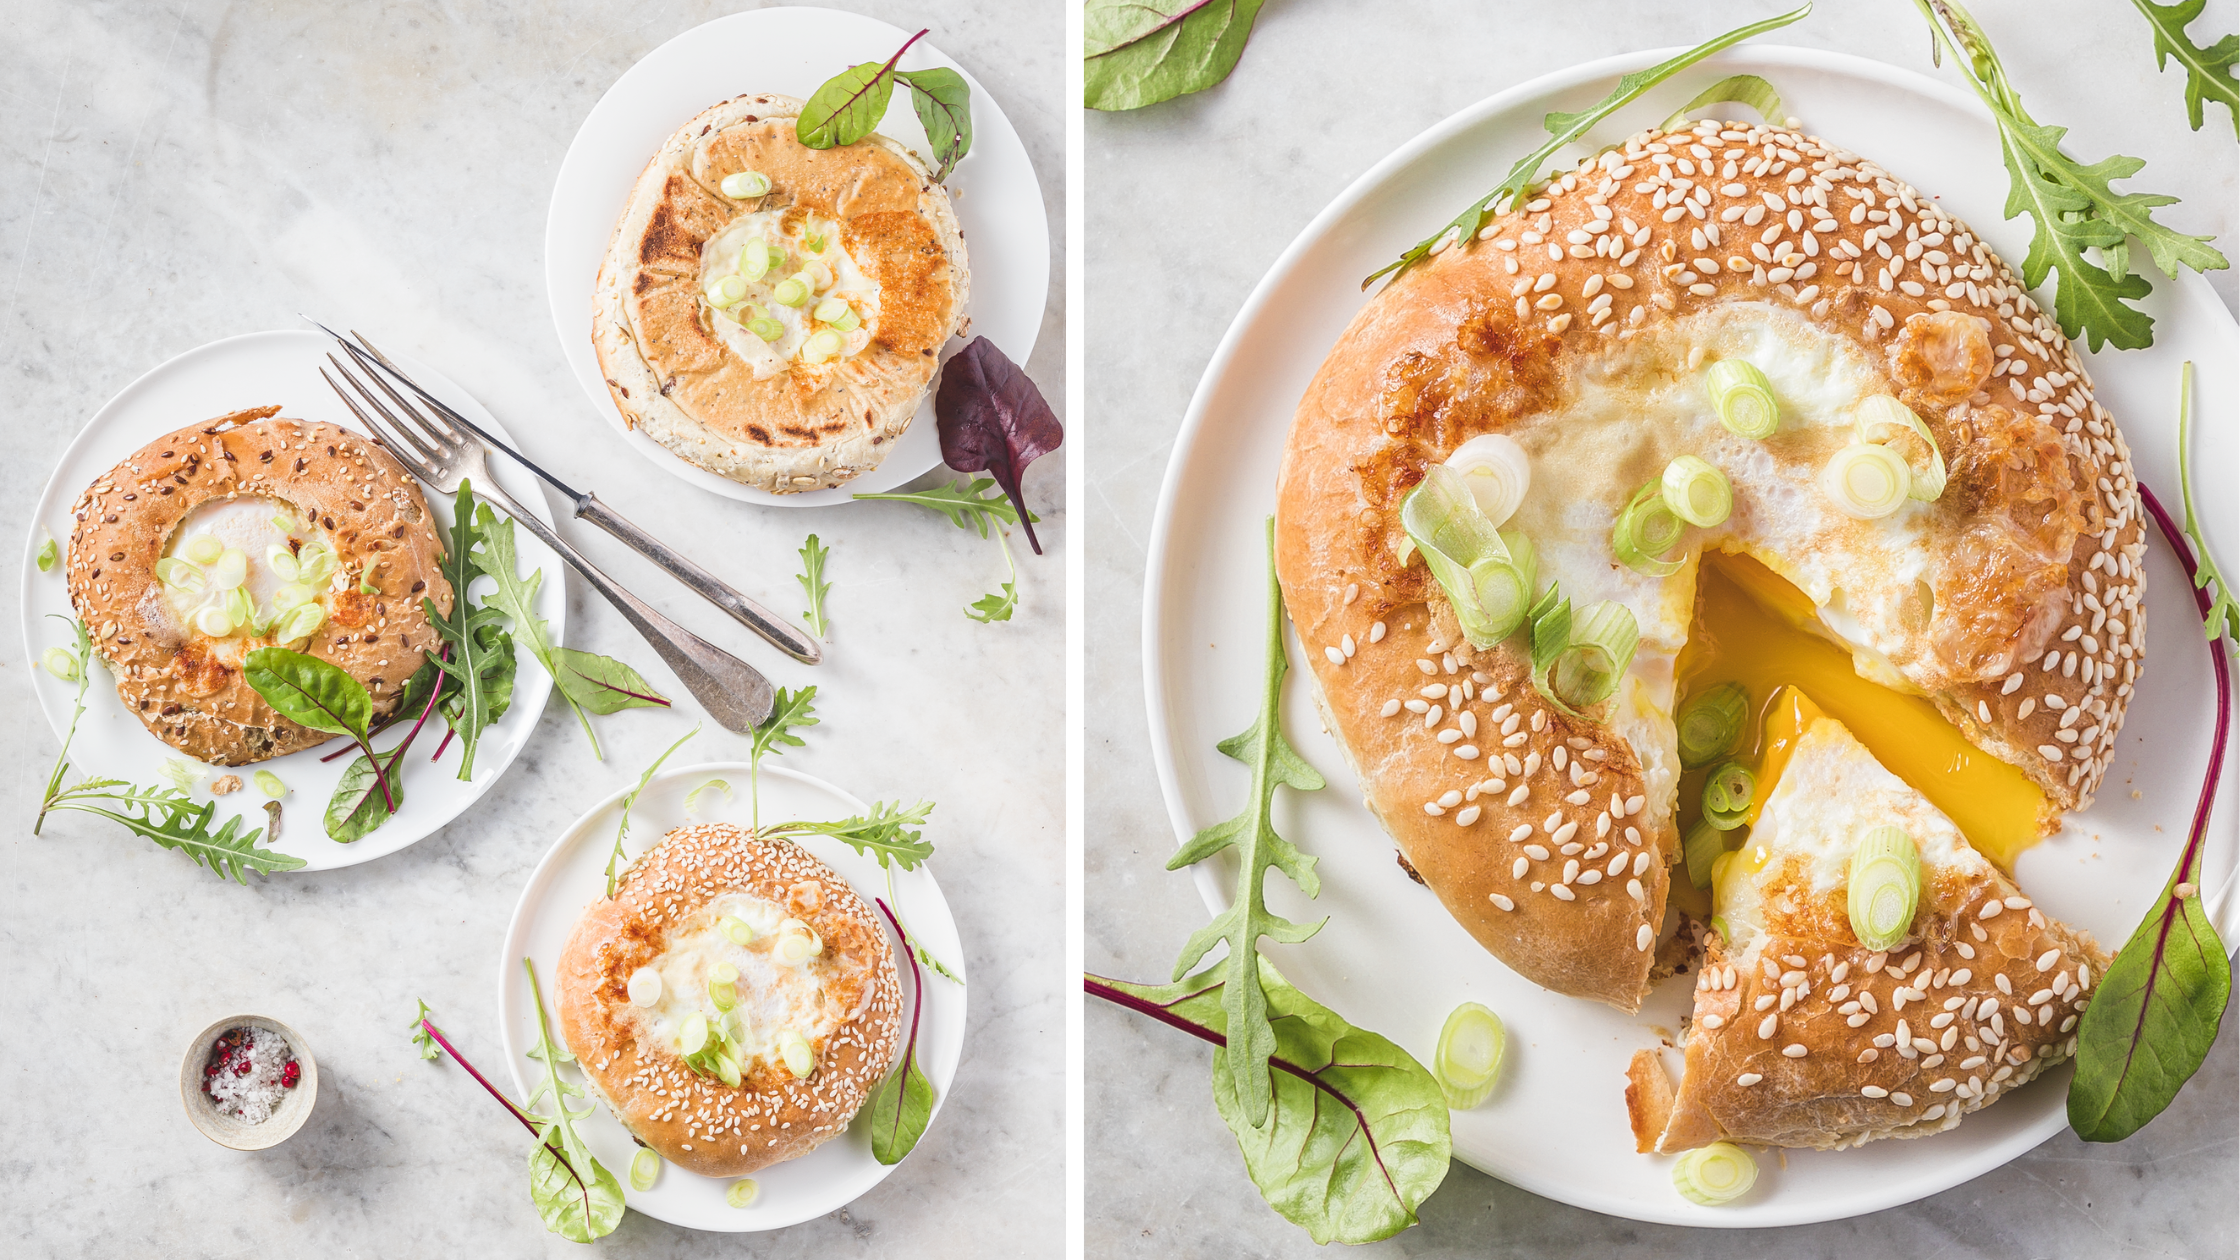 Bagels with Egg and Mozzarella (Egg-in-a-Hole)